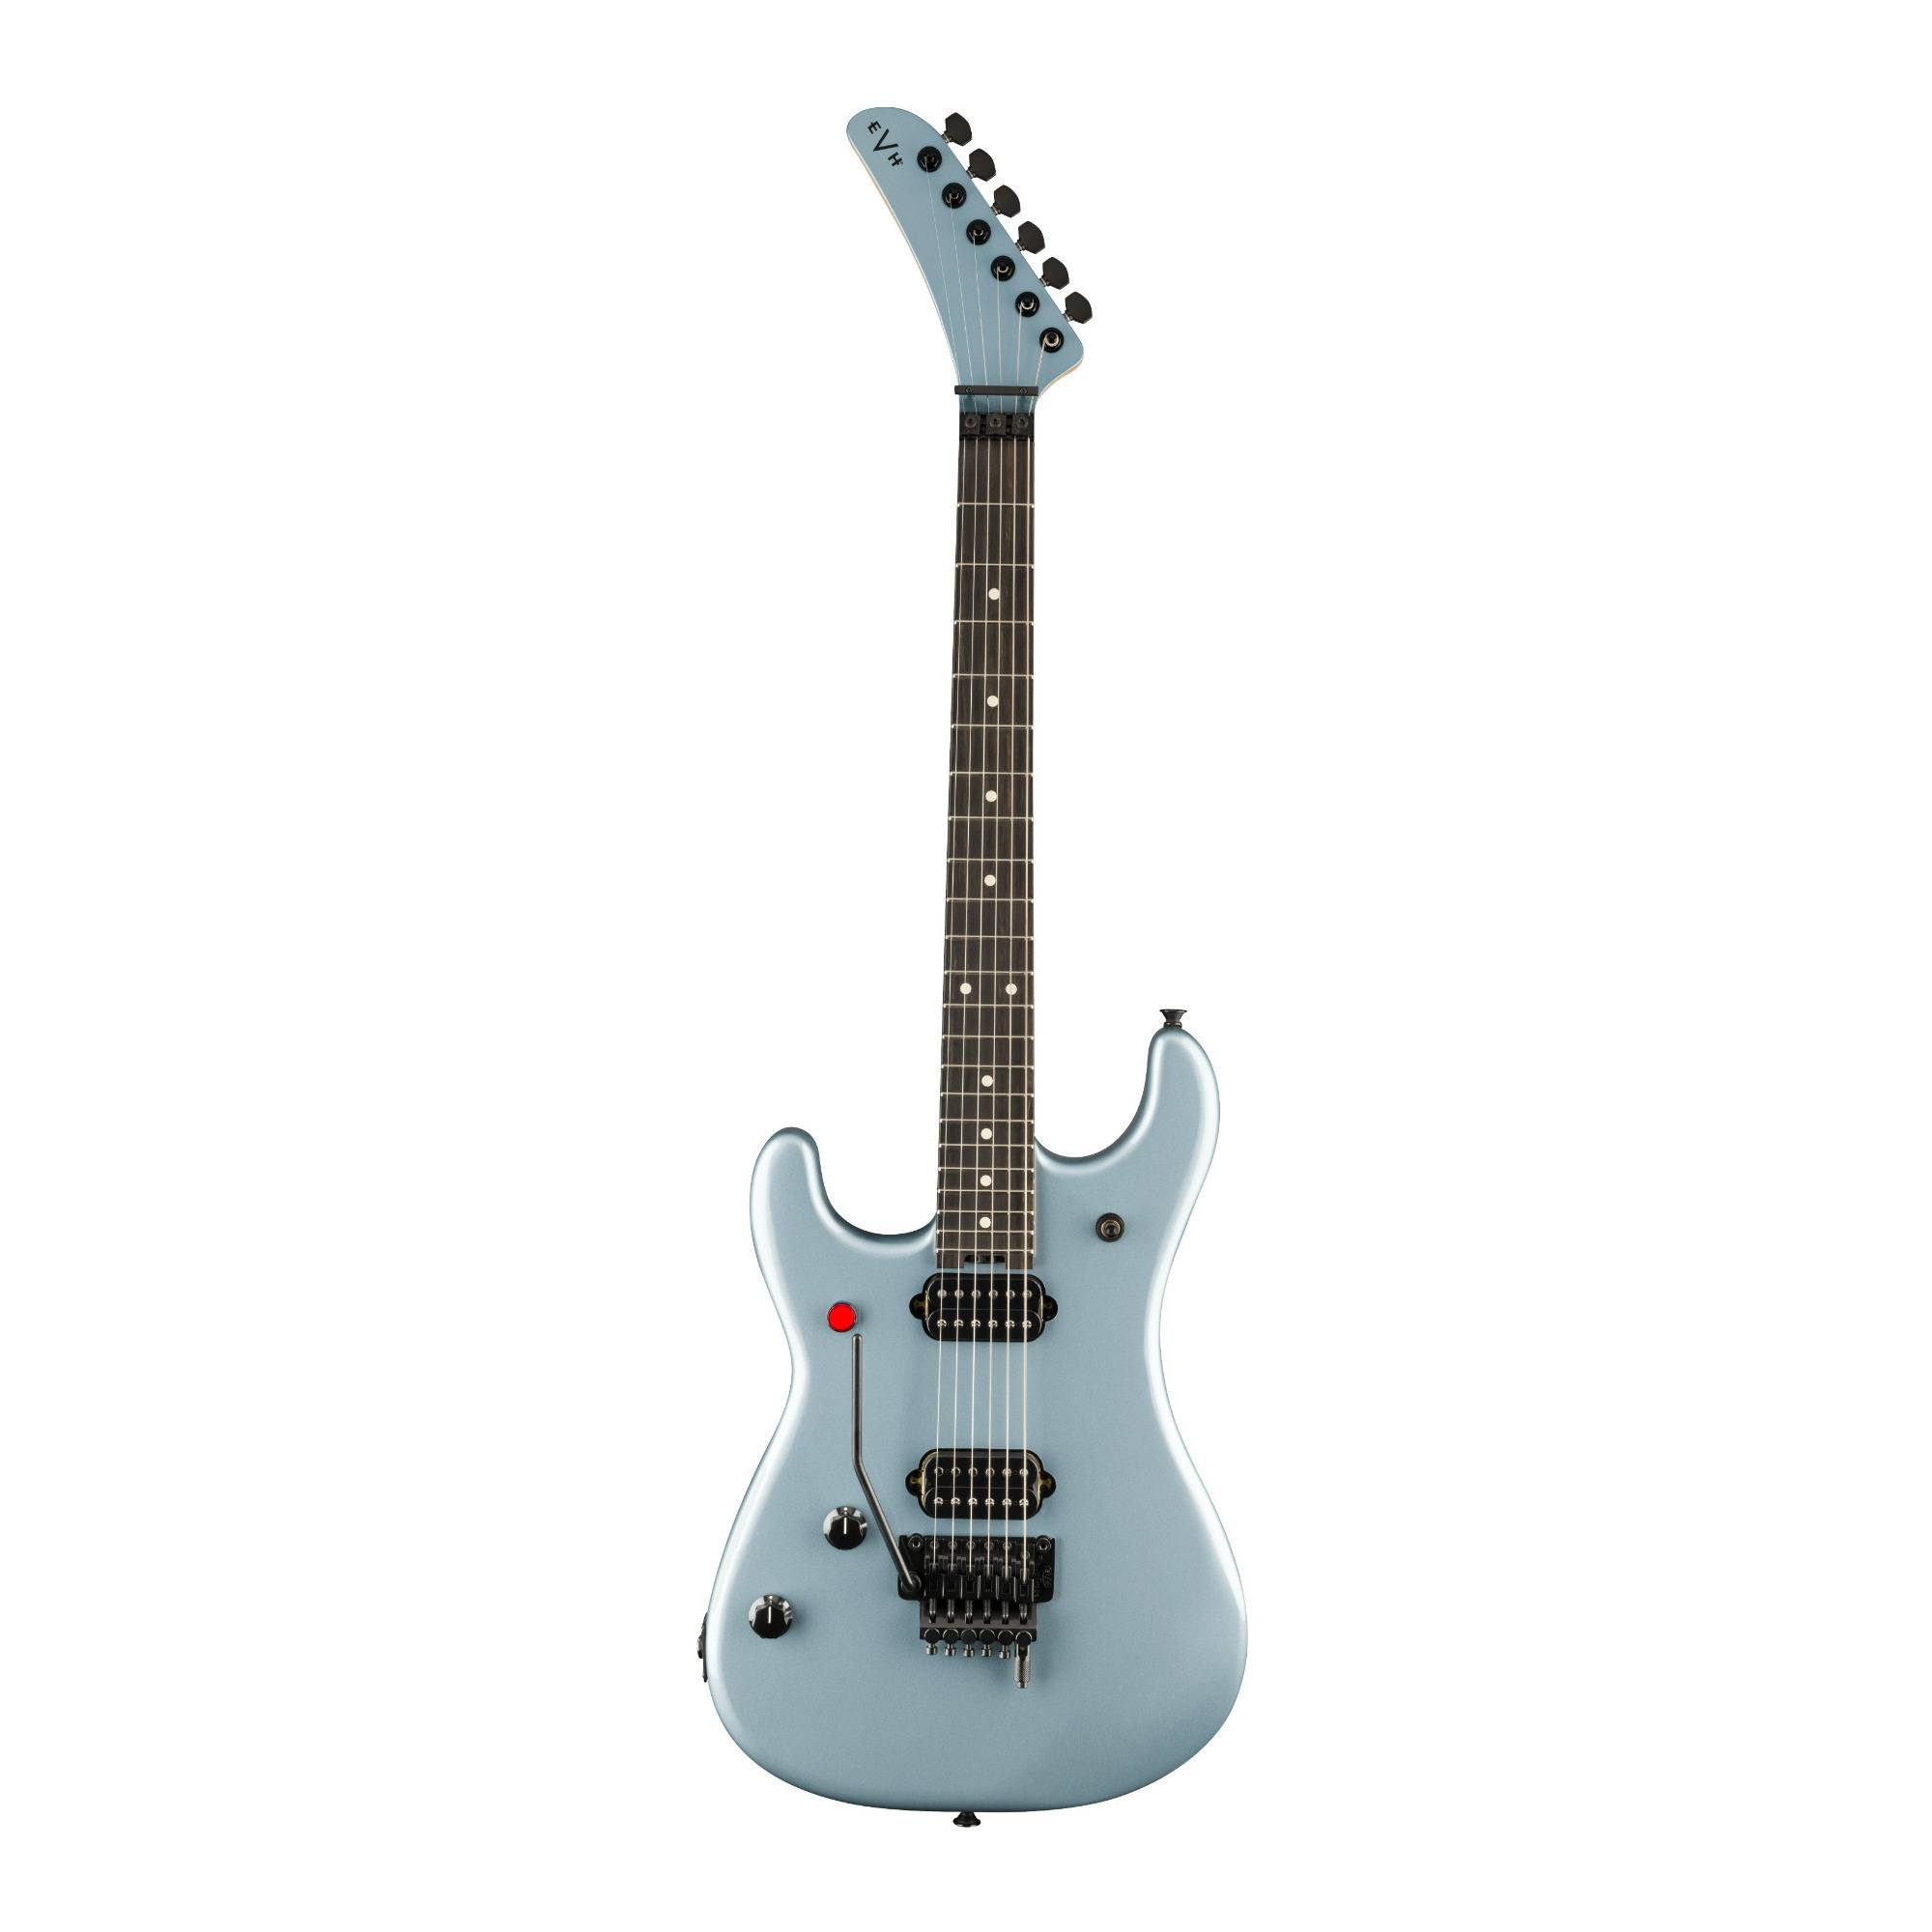 EVH 5150 Series Standard Basswood Body 6-String Electric Guitar (Left-Handed, Ice Blue Metallic)